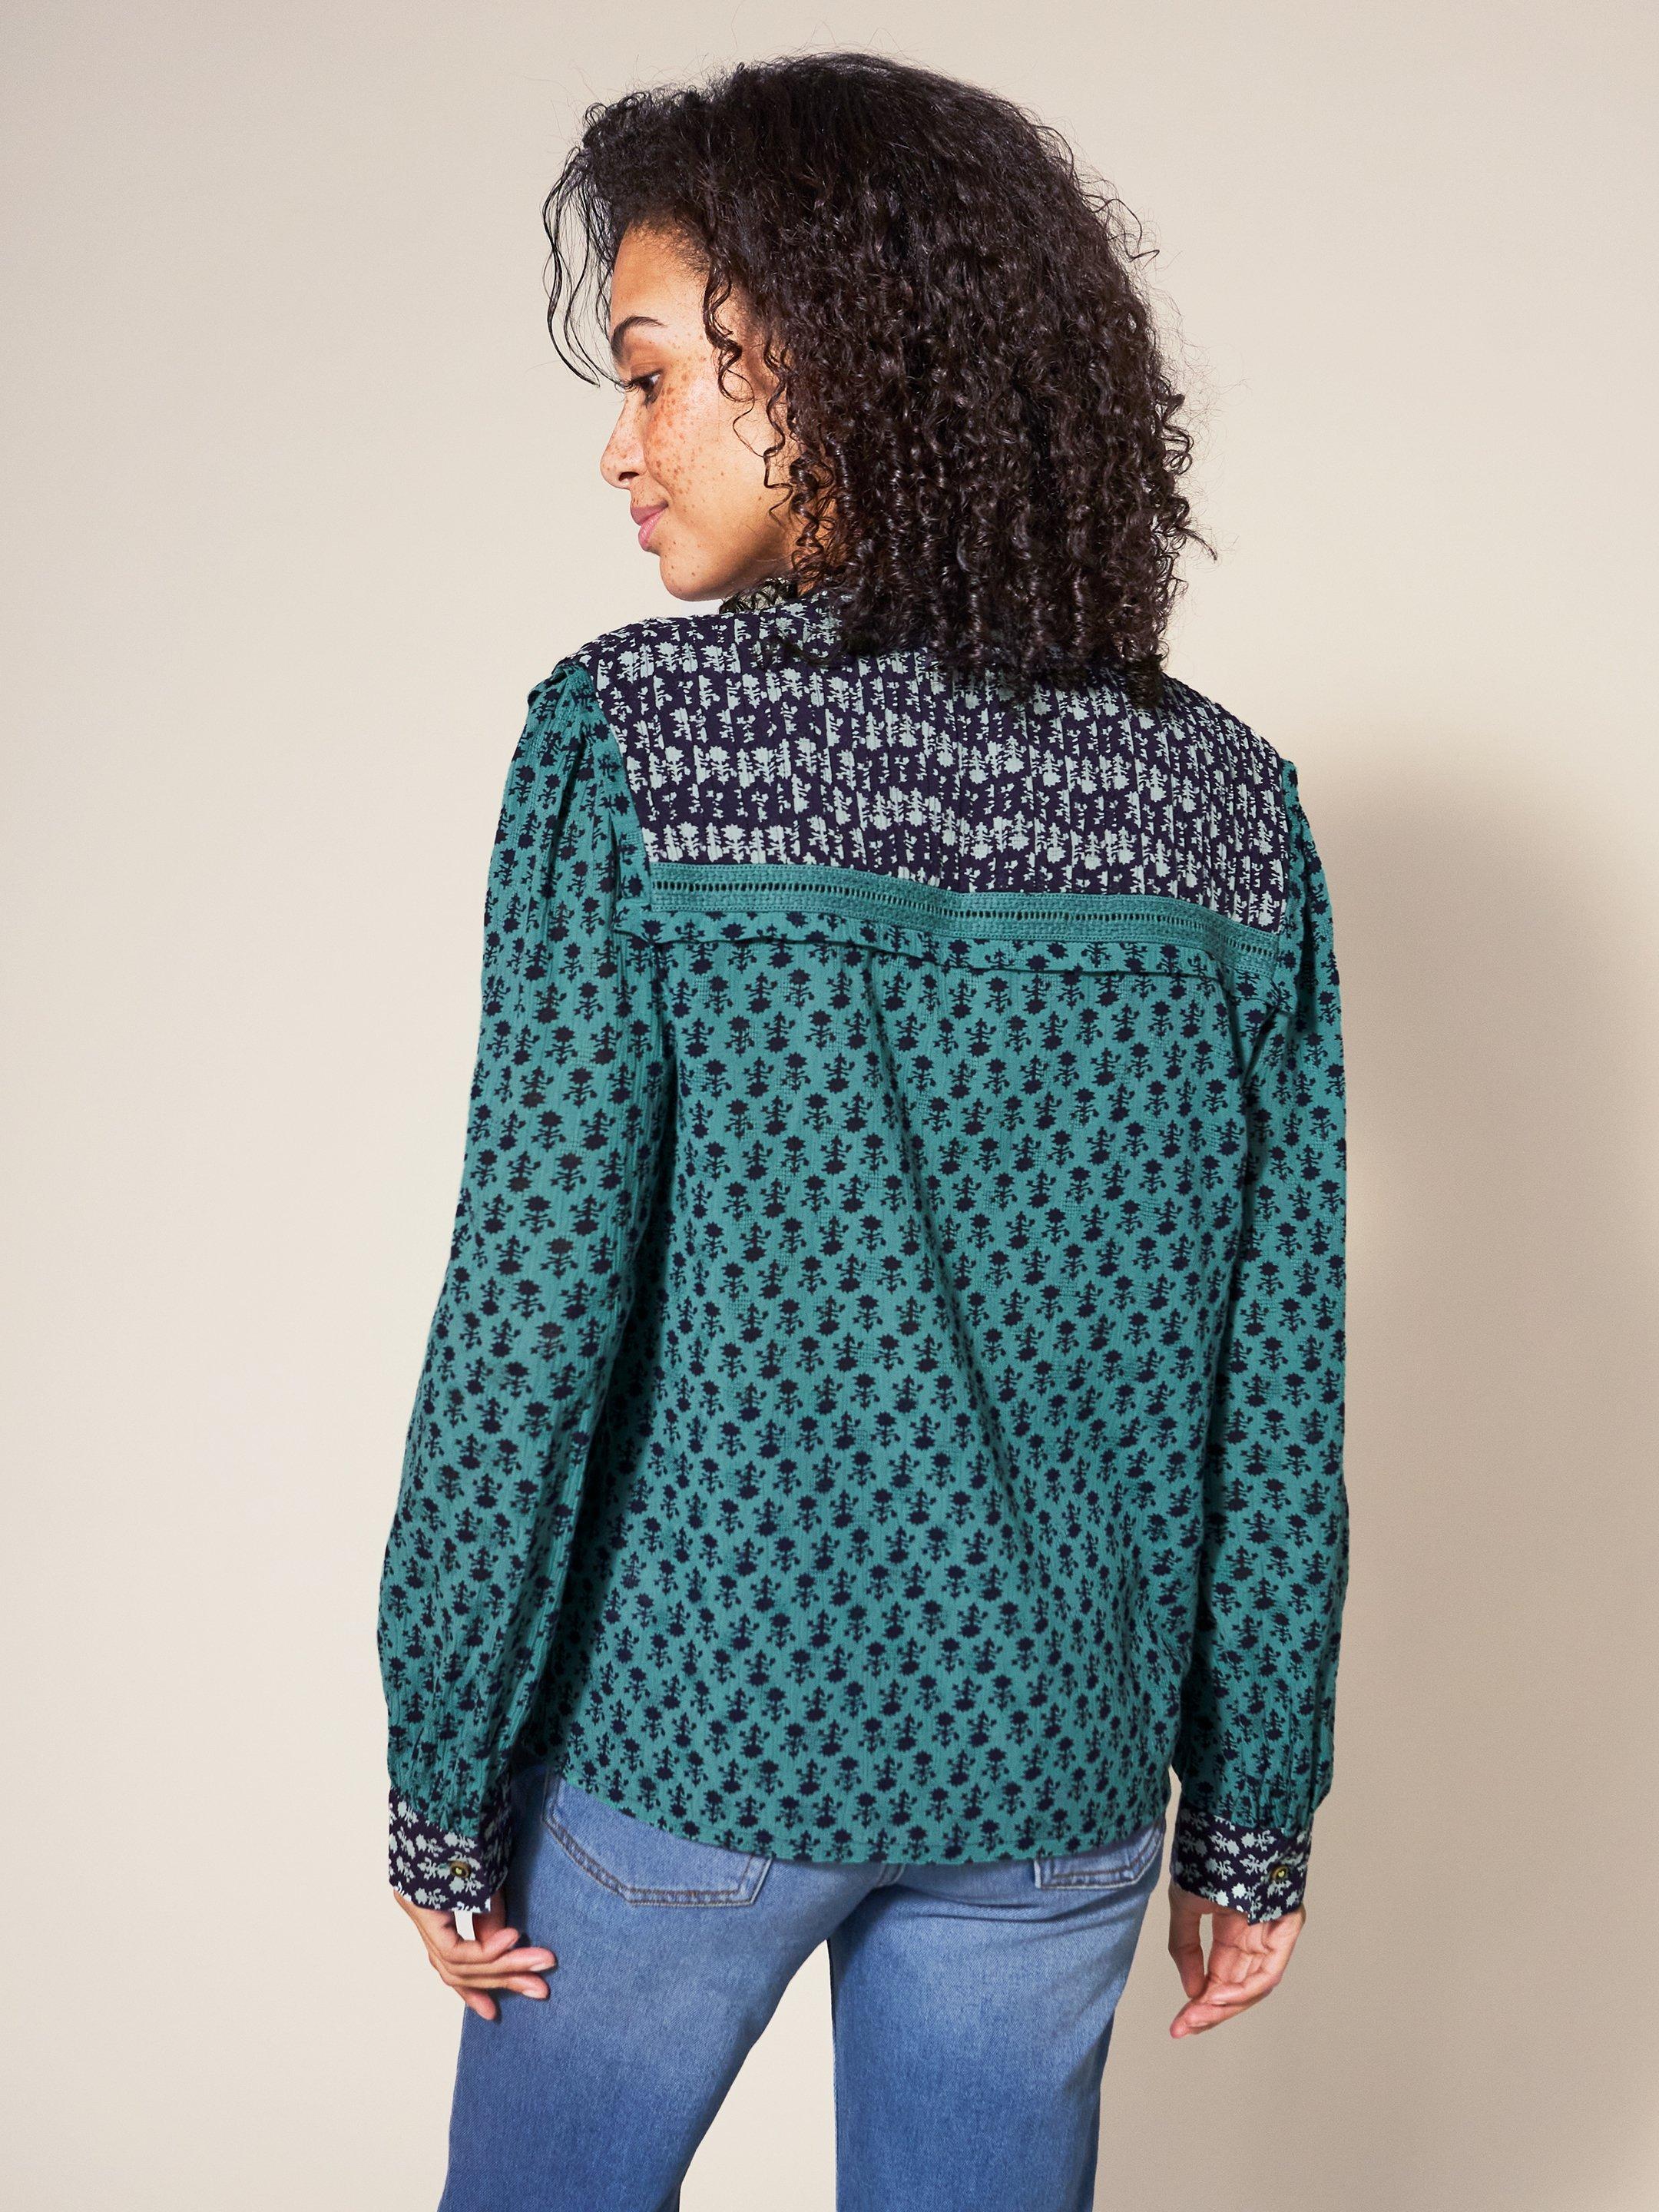 Mabel Mixed Print Shirt in TEAL MLT - MODEL BACK